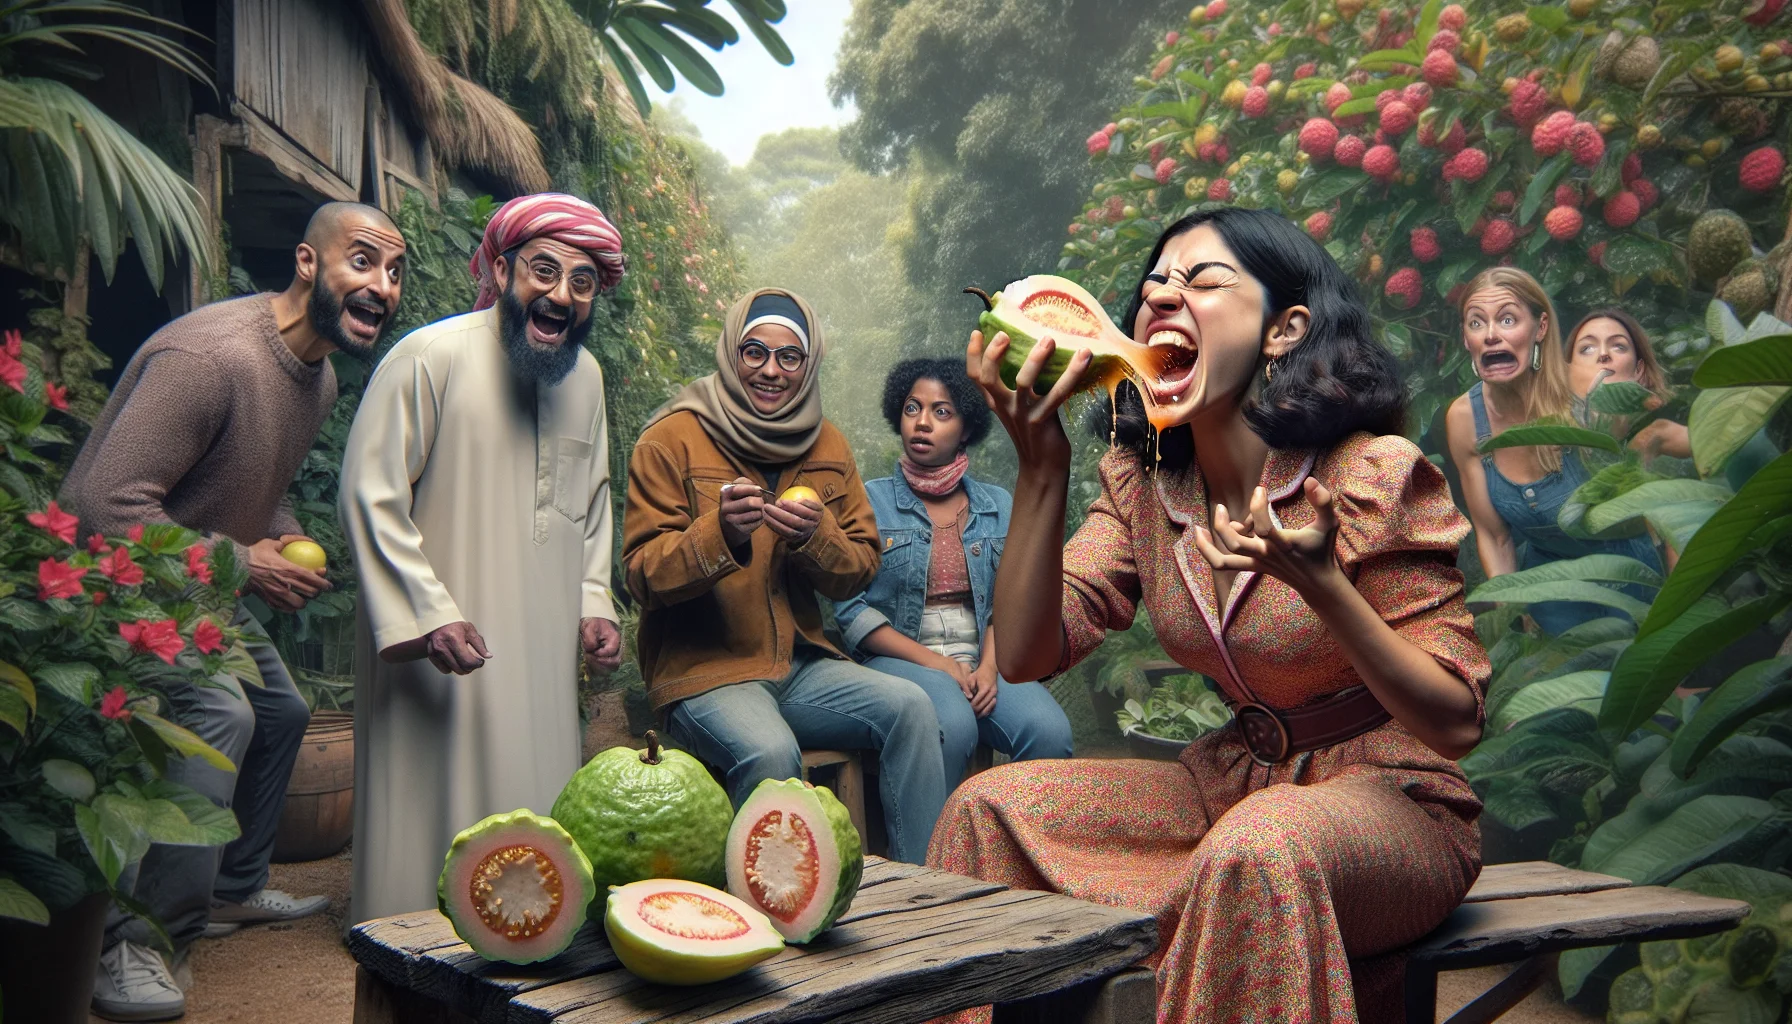 Create a hyper-realistic image of a humorous scenario taking place in a lush, vibrant garden. In the foreground, a Hispanic woman is seated on a rustic wooden bench, demonstrating how to enjoy a fresh guava. She is mid-bite into the ripe fruit, juice dribbling down her chin and a wide, joyous smile on her face. Around her, curious friends, a Middle-Eastern man and a Black woman, are watching on in amusement, the man holding a guava of his own uncertainly. The background scene is full of a variety of blooming plants, indicating the richness and rewards of gardening.